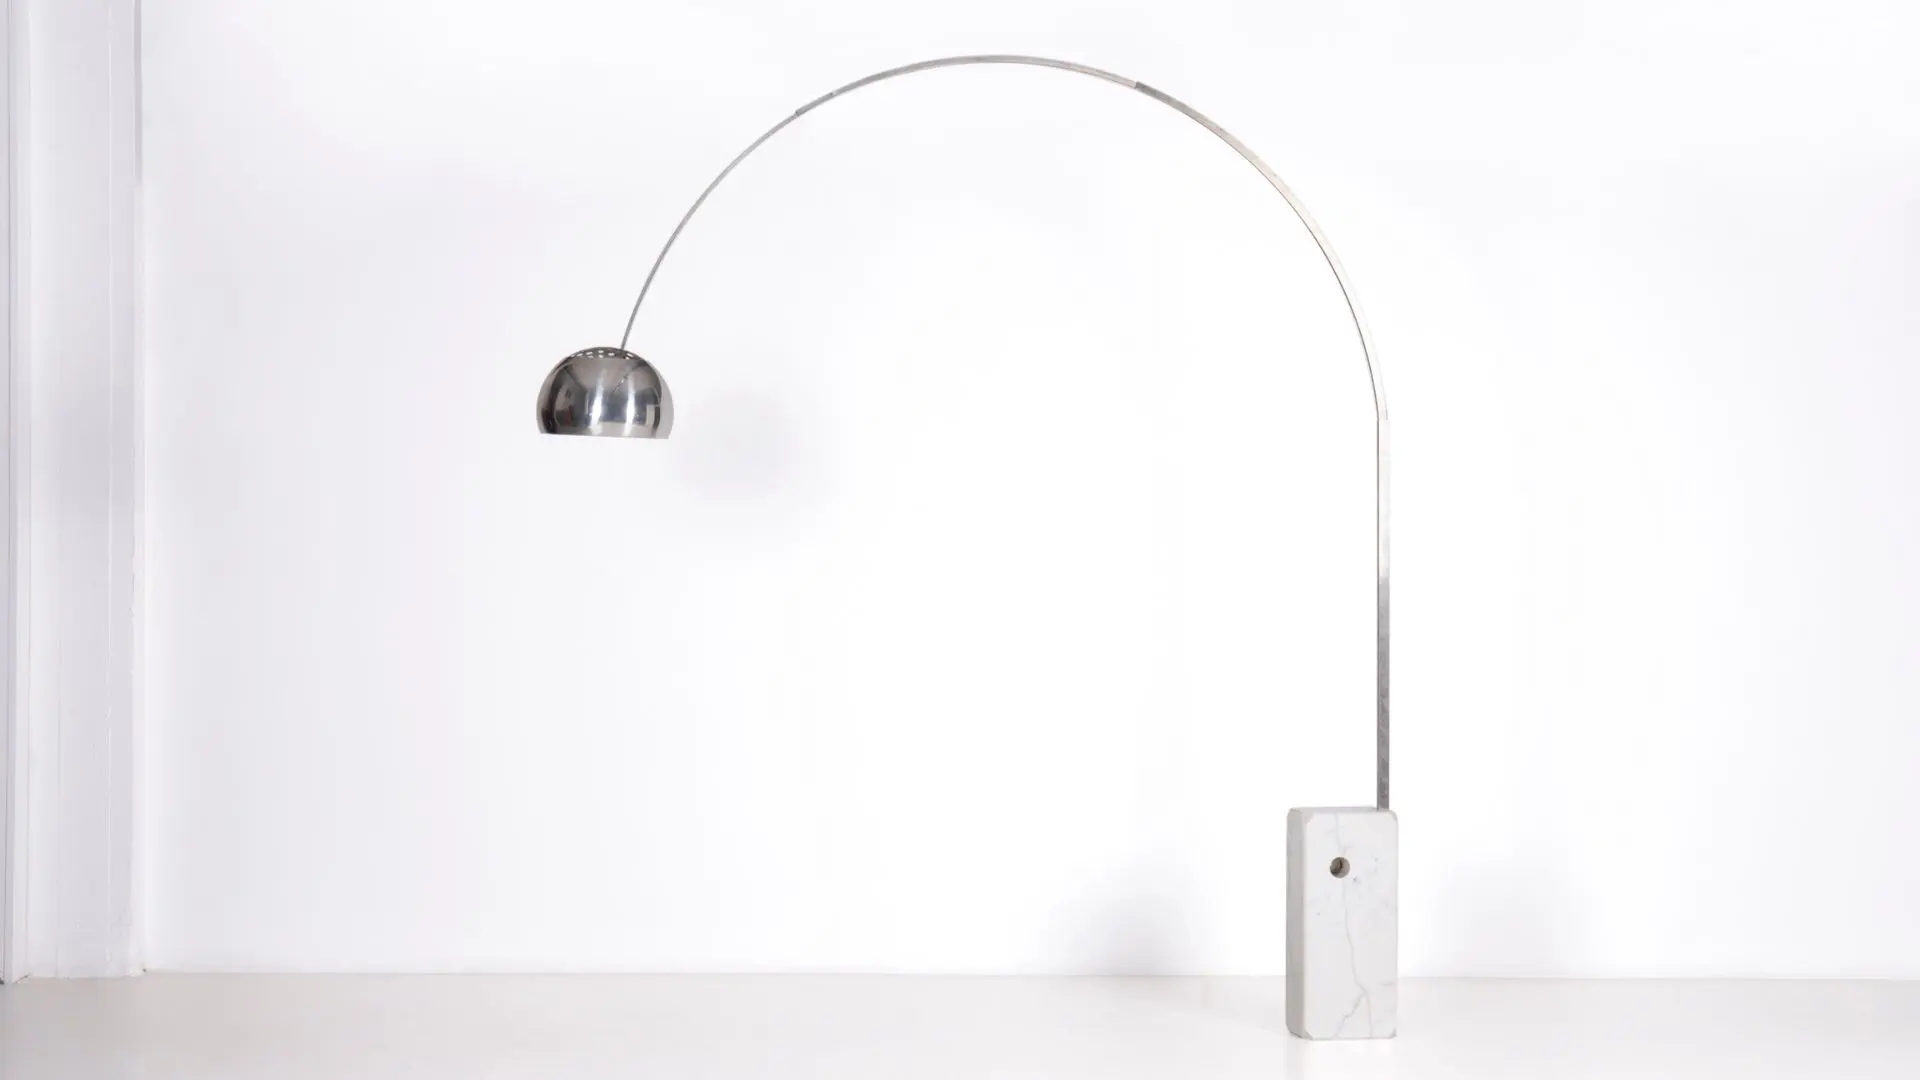 Arco lamp by Achille and Pier Giacomo Castiglioni - 20 most famous product designers